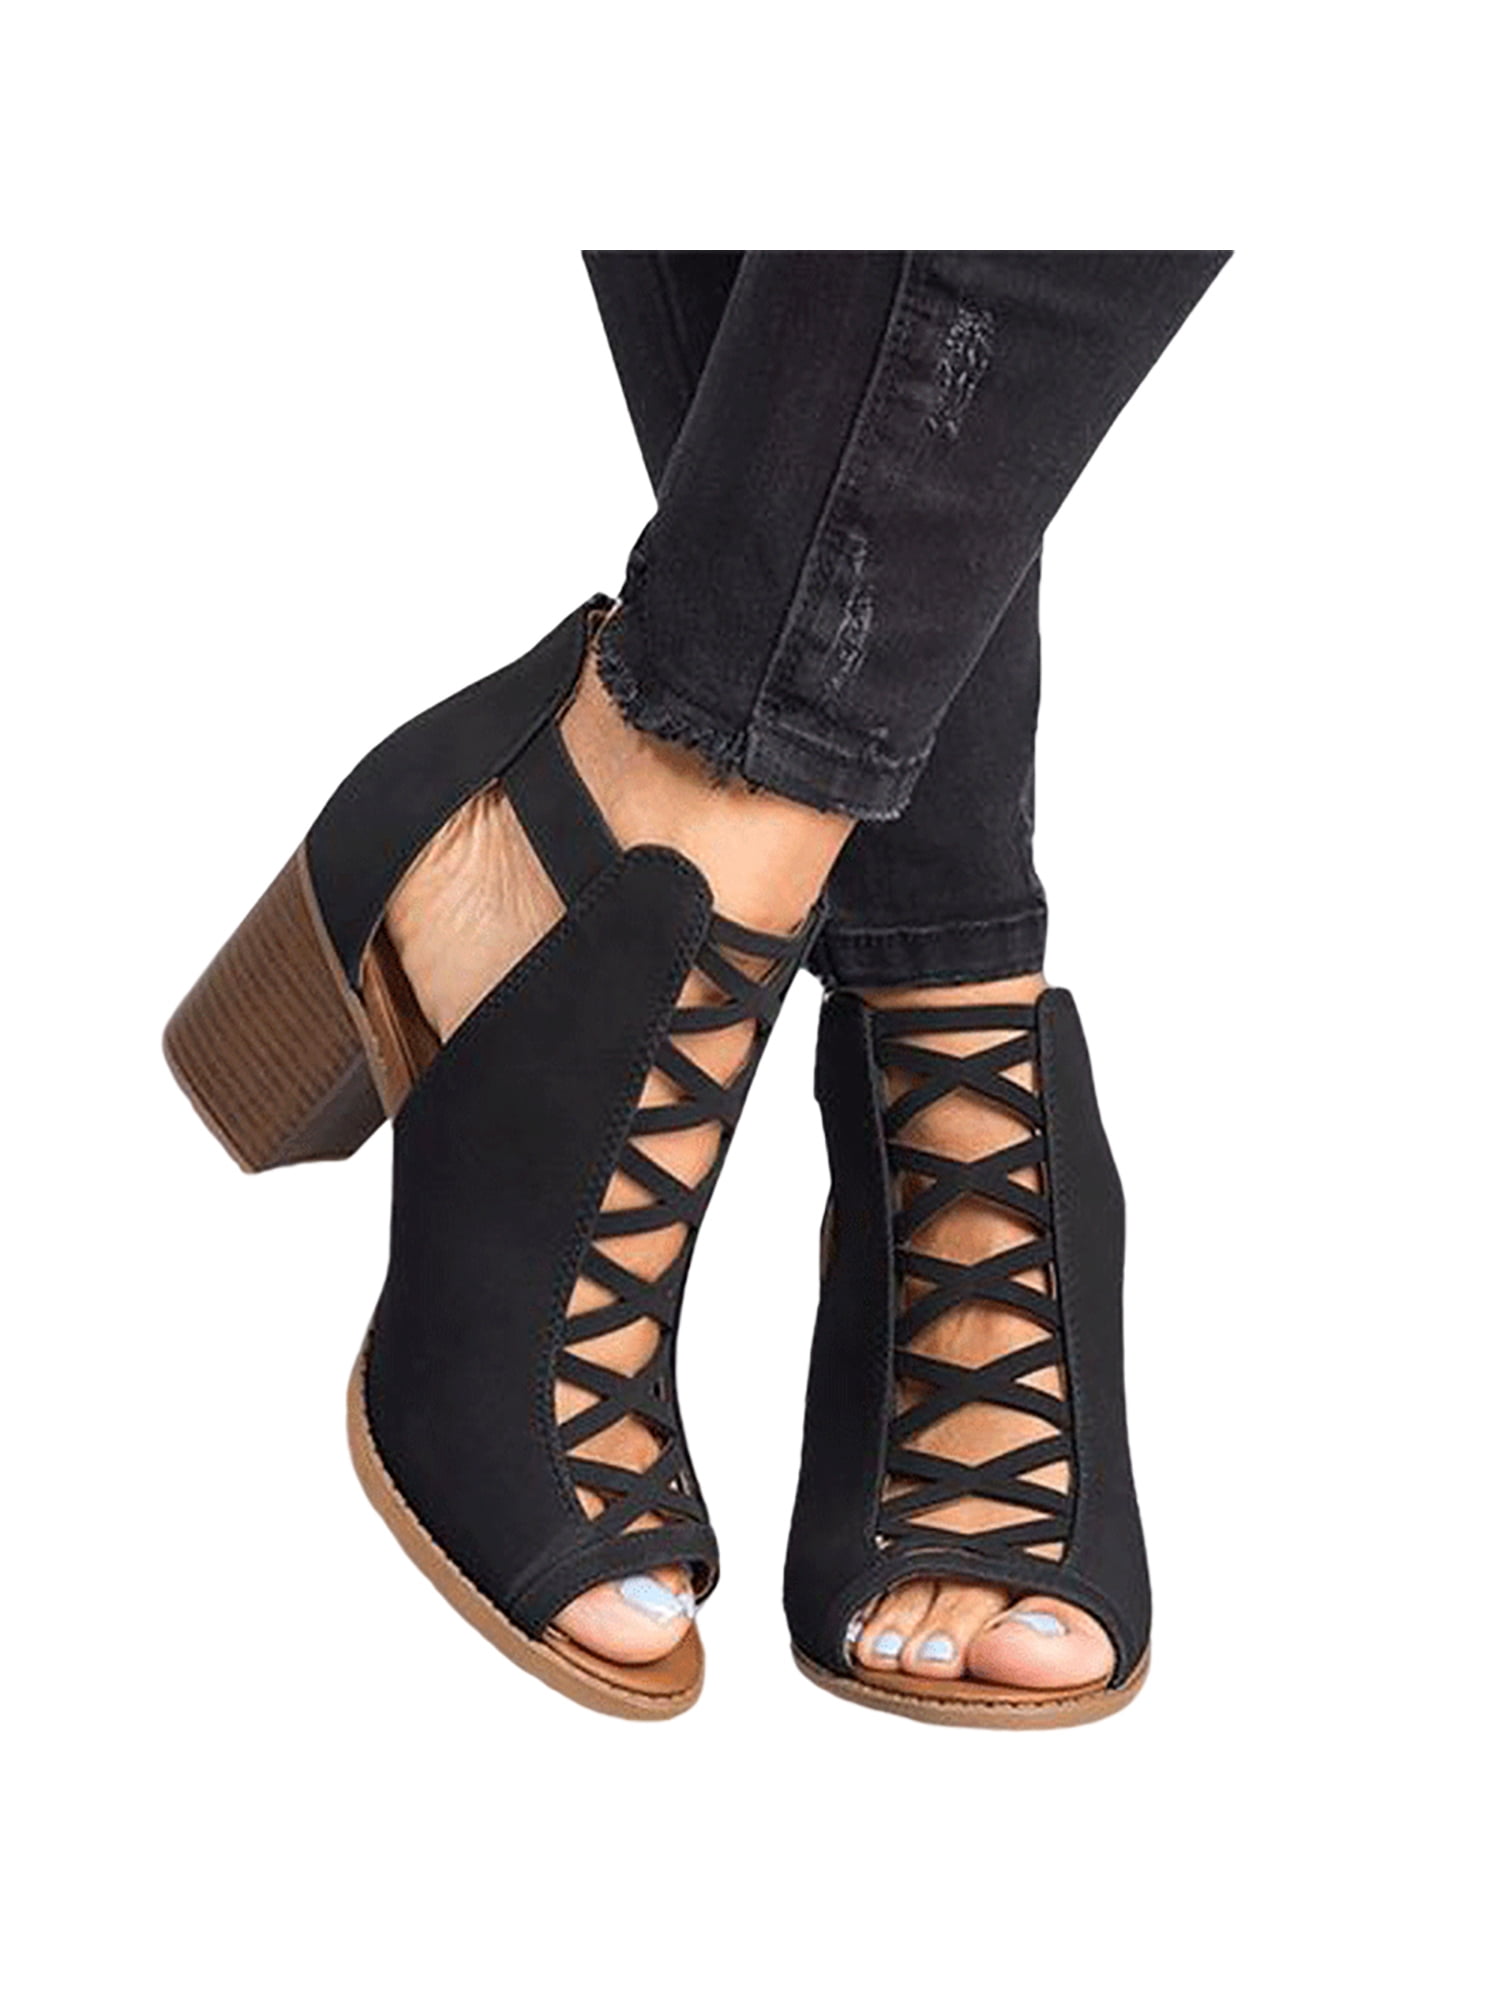 Women's Ladies Low Wedge Sandals Hollow Out Ankle Strap Roman Shoes Size 5-9